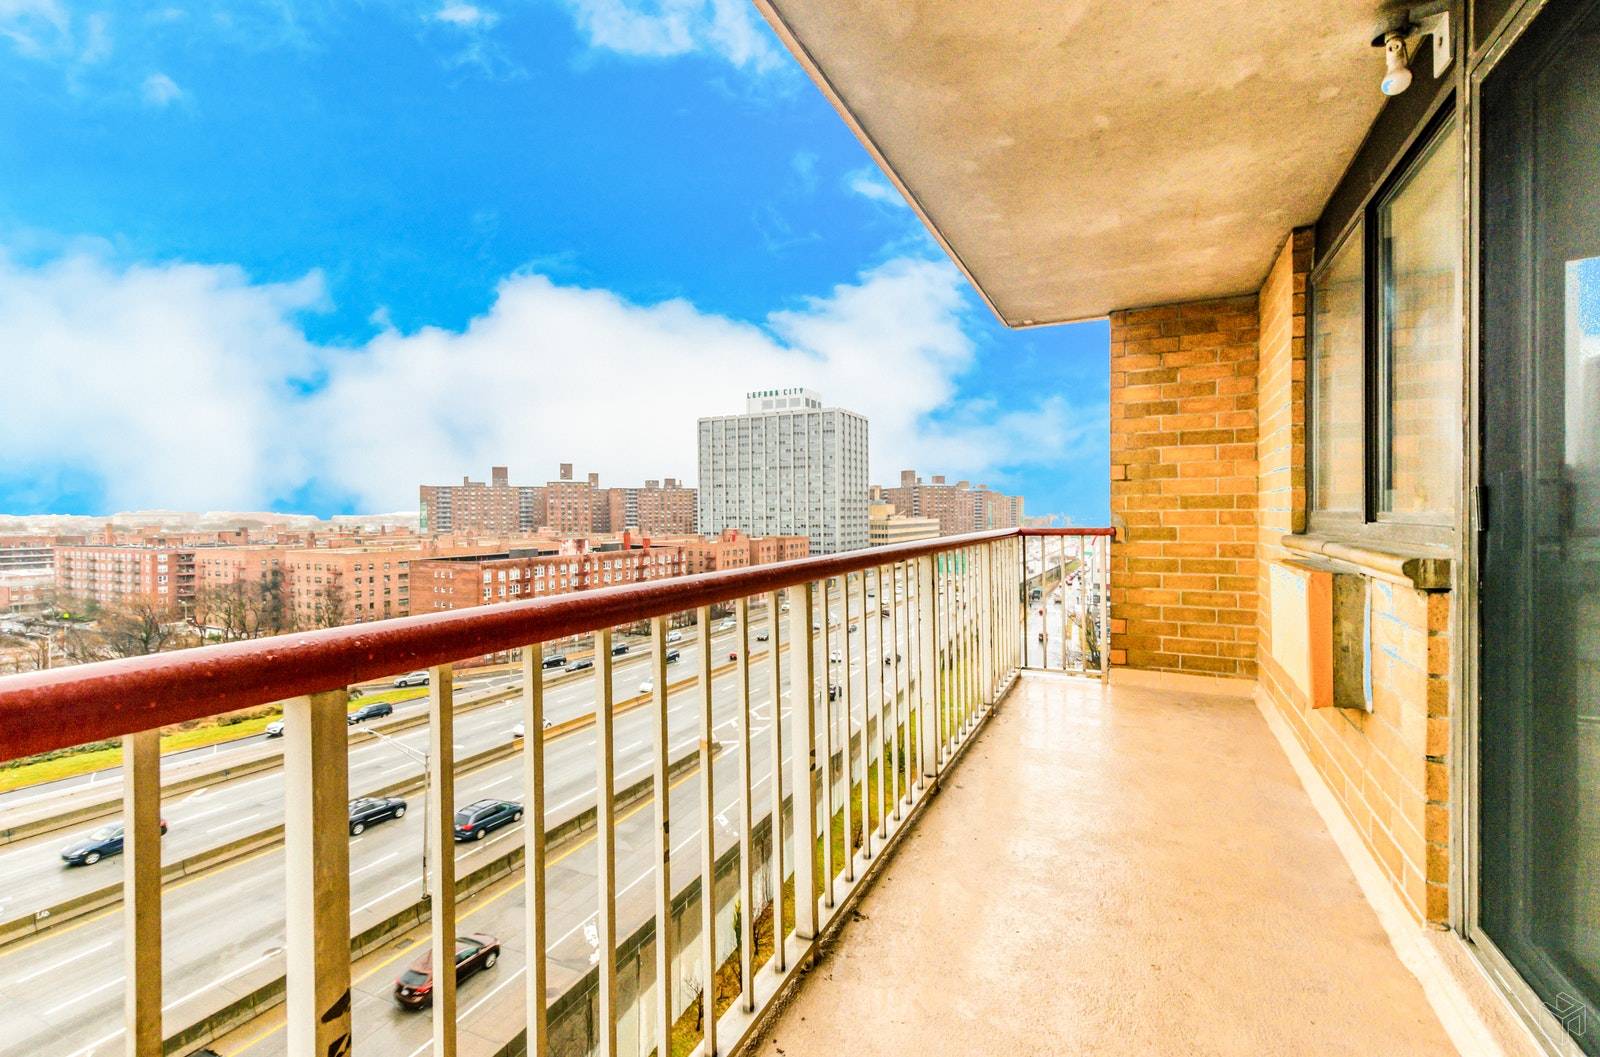 This stunning Two Bedroom Two Bathroom condo with 24 hour door person is located in Rego Park, just off of Northern Blvd.